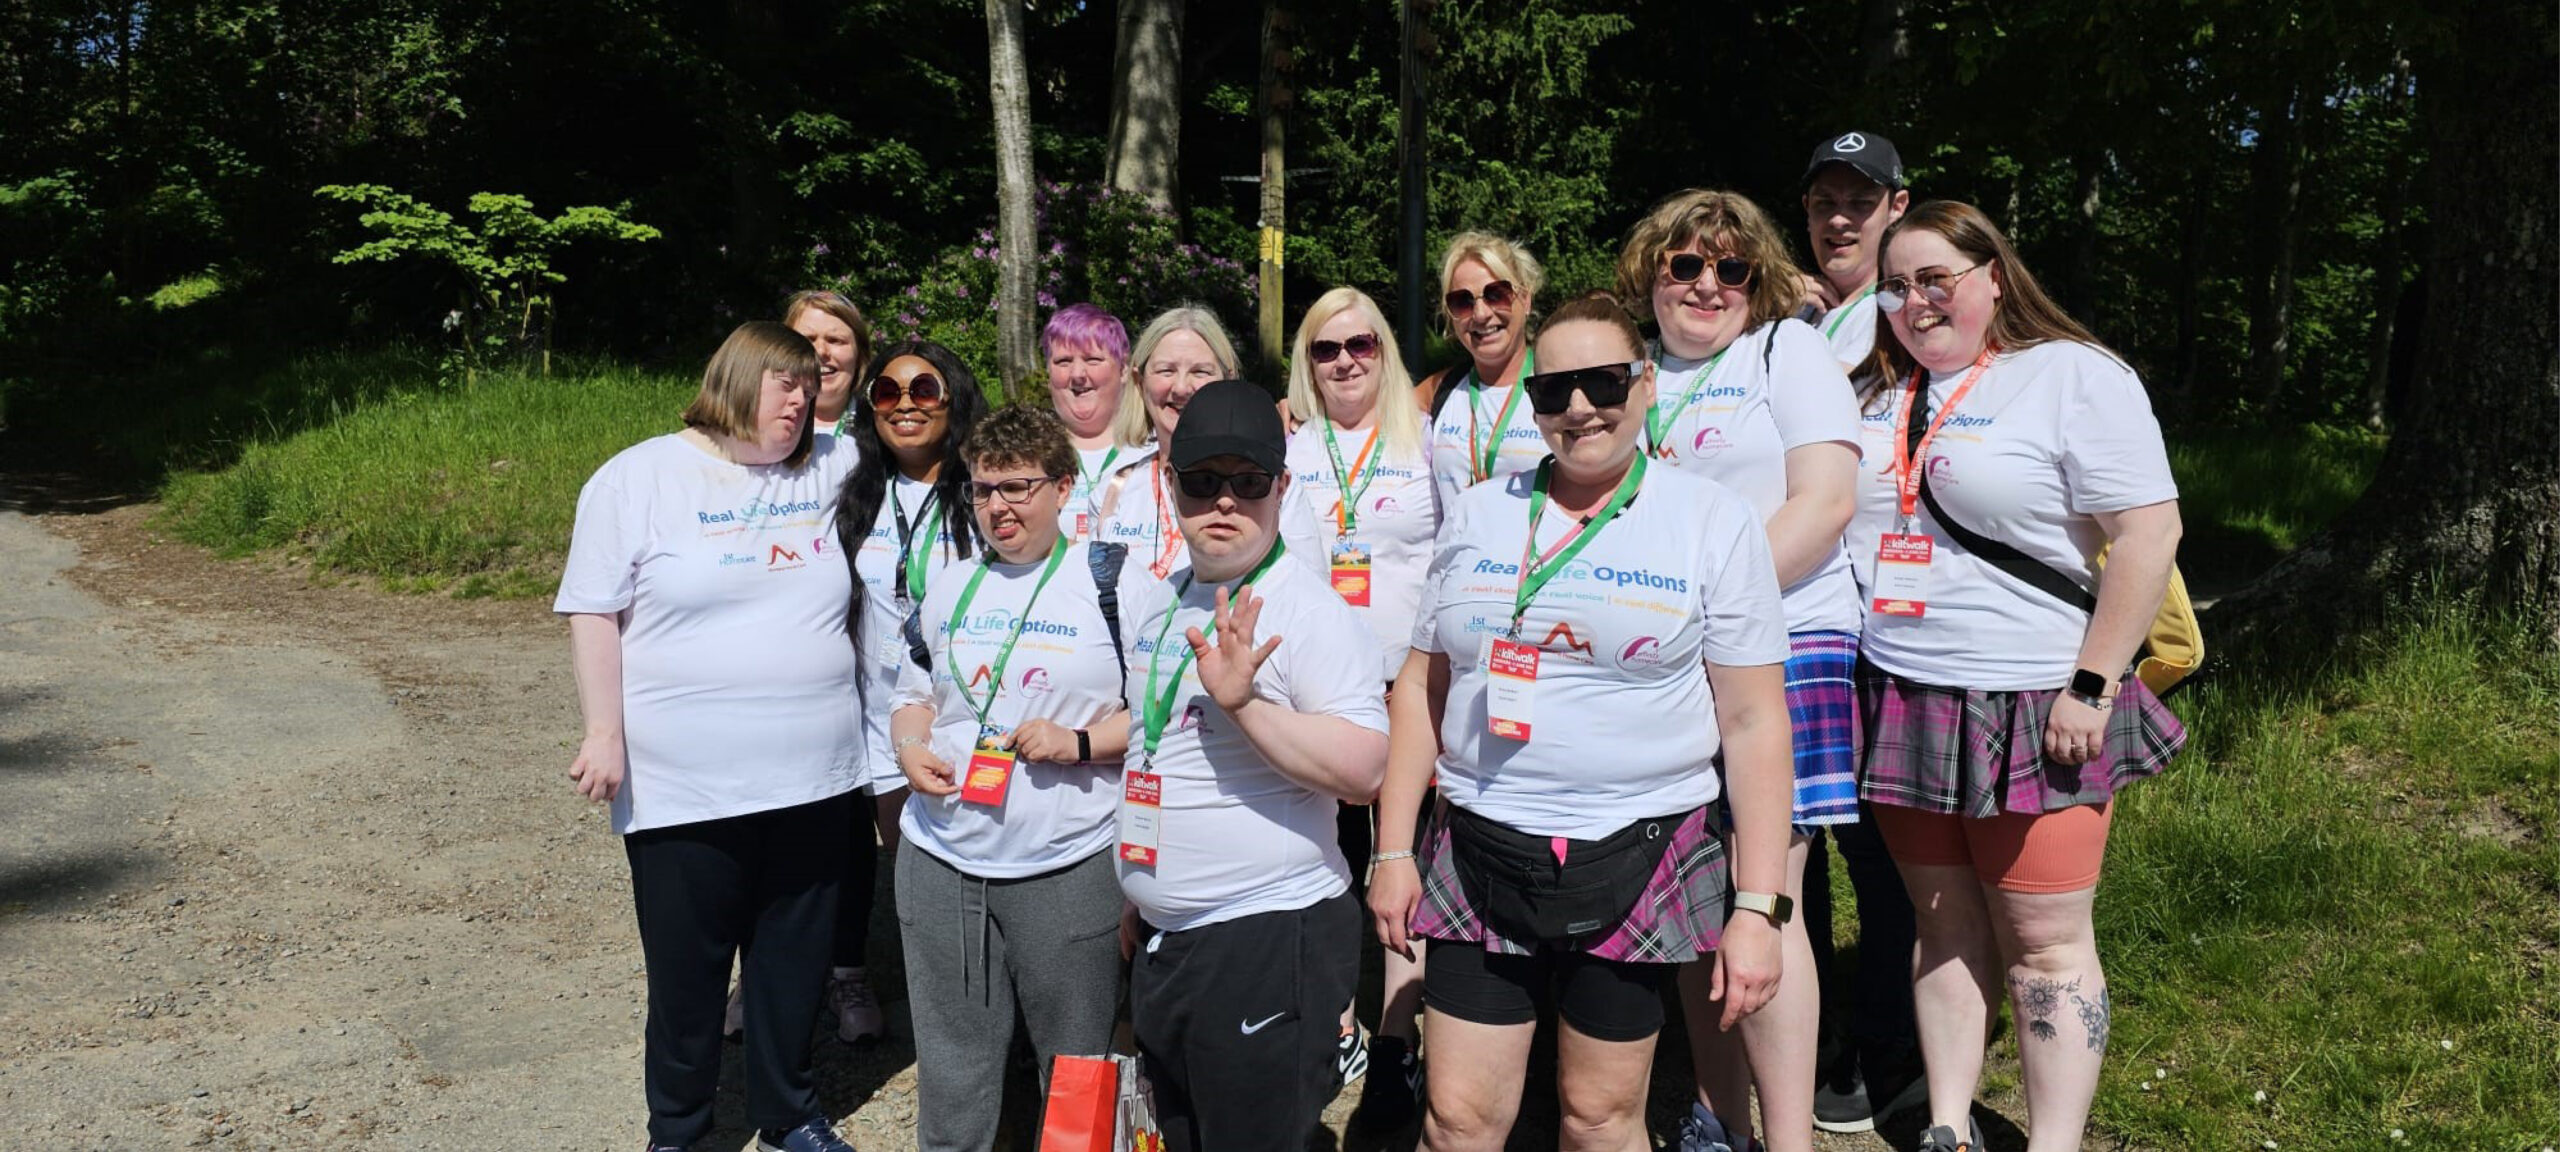 Aberdeen Kiltwalk to Raise Funds for our Inverurie Service